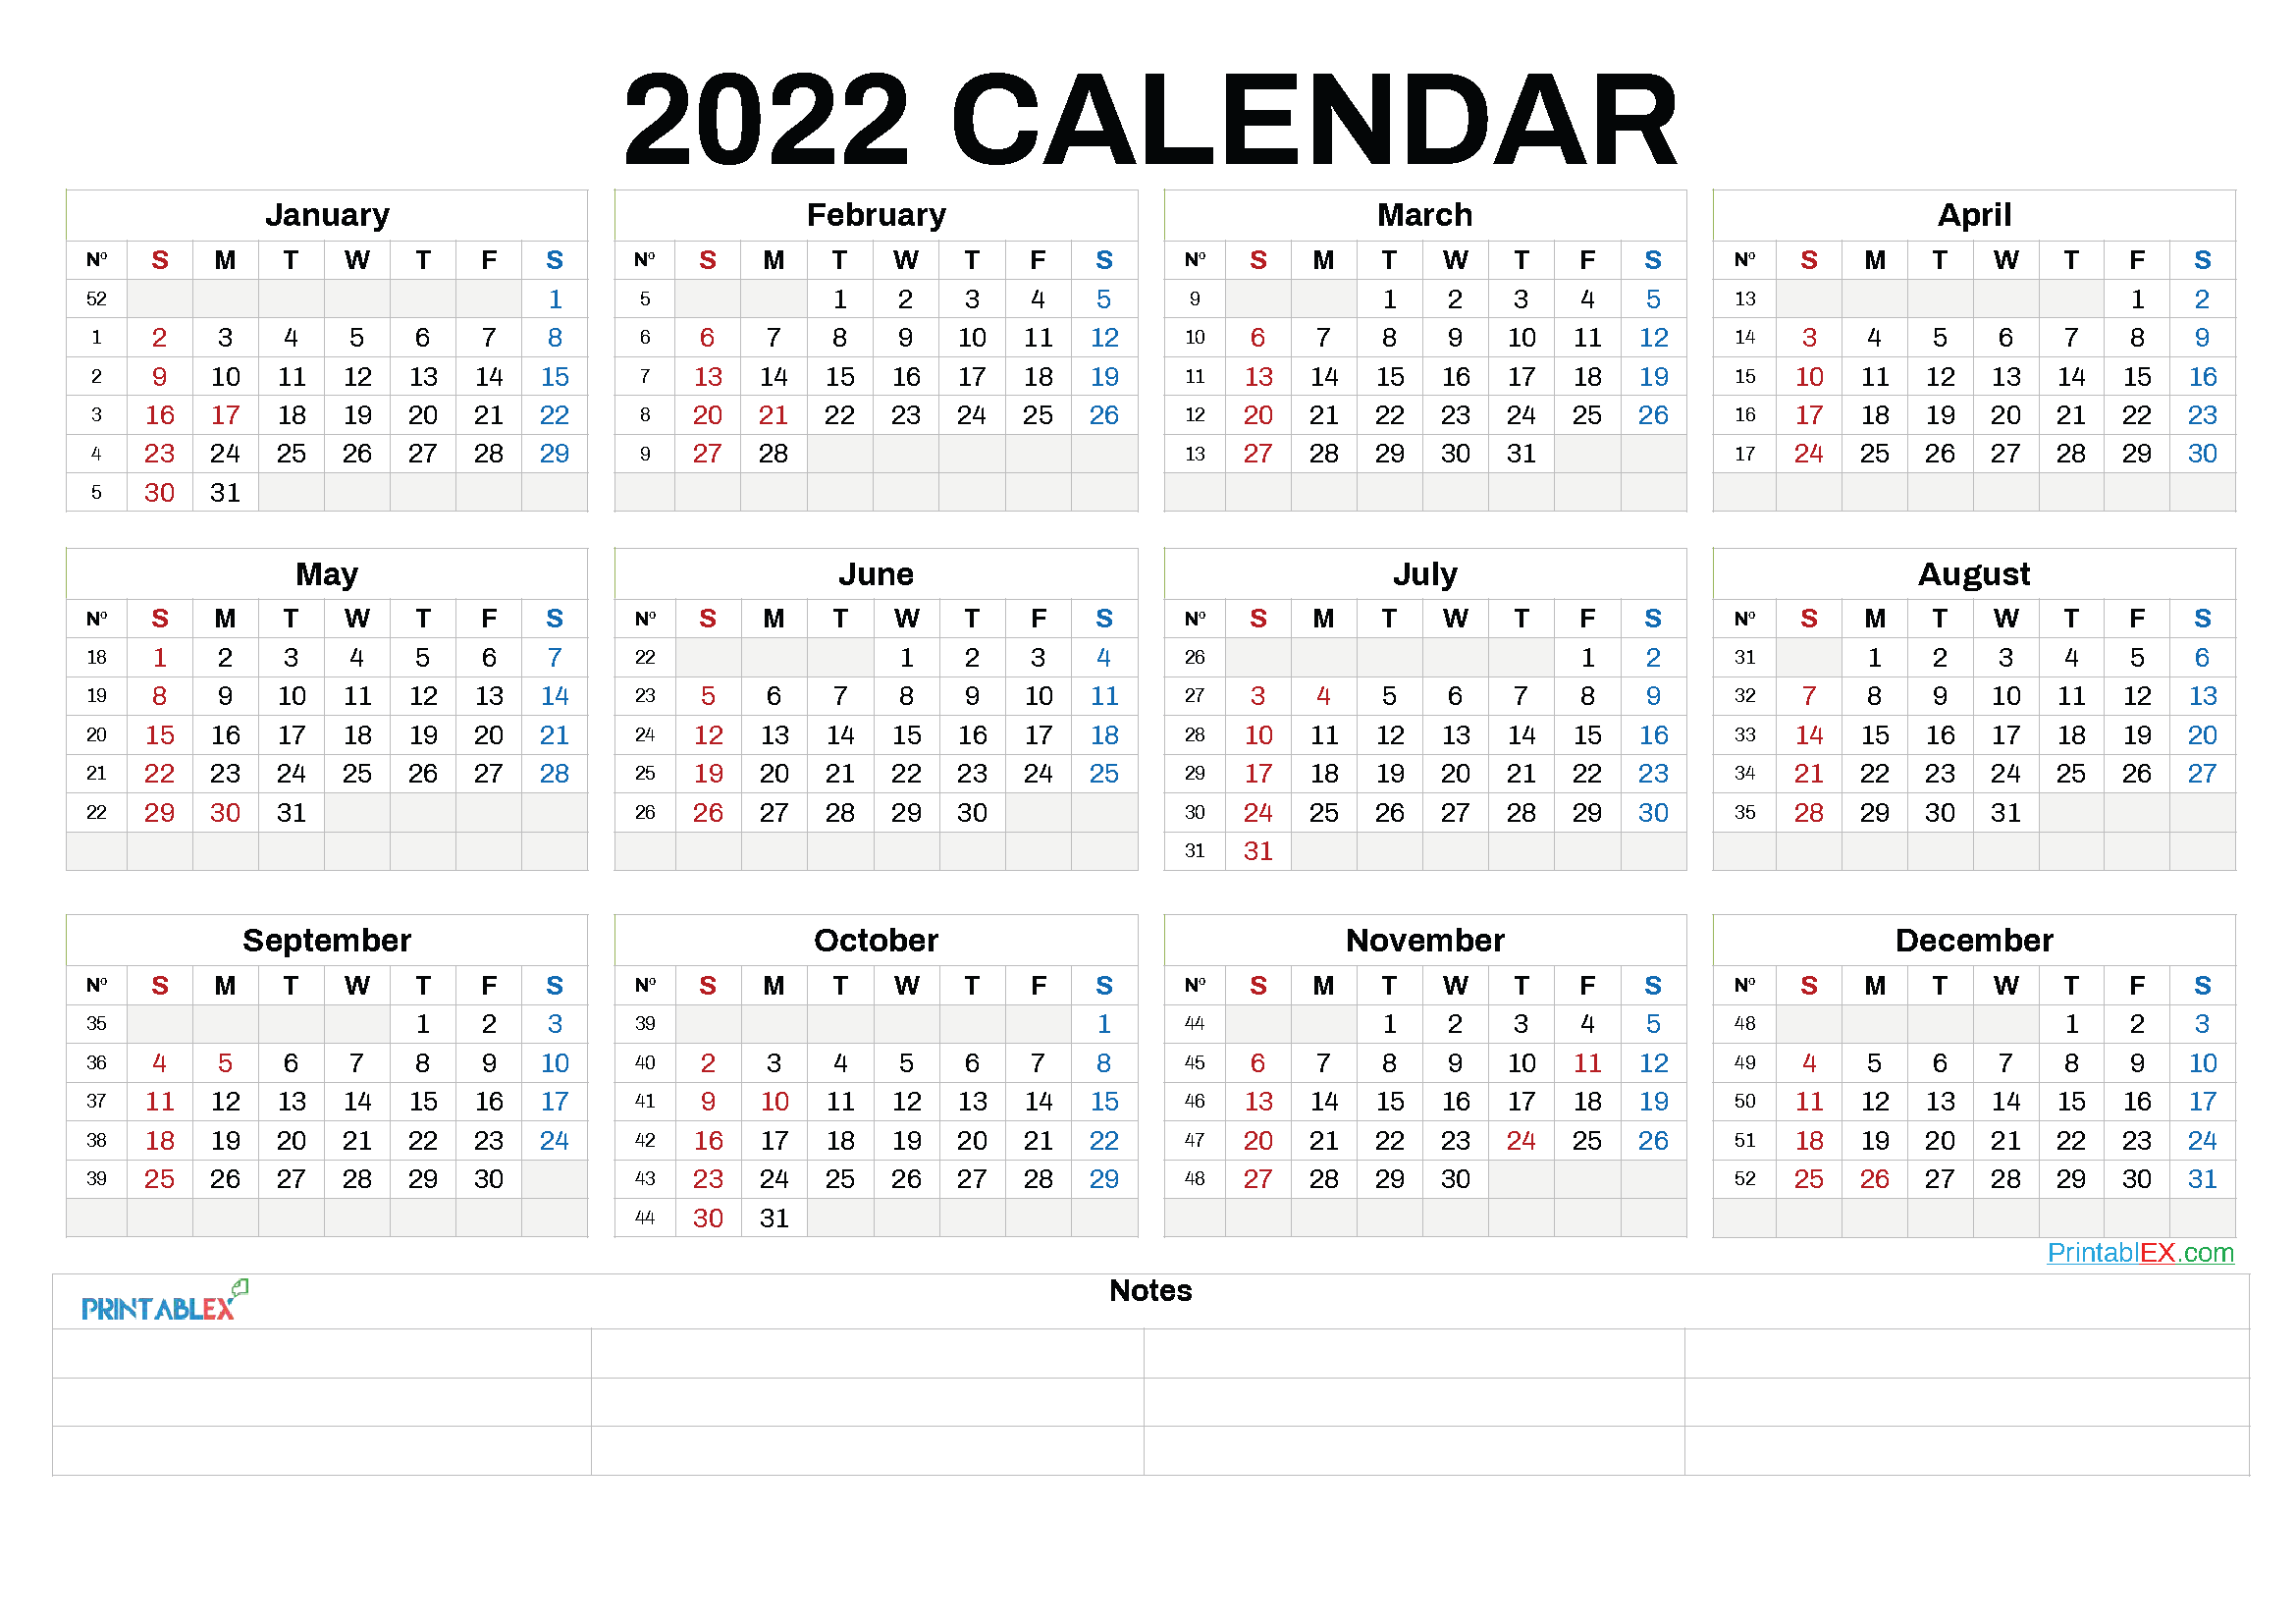 Printable 2022 Calendar by Year - 6 Templates - Free ...